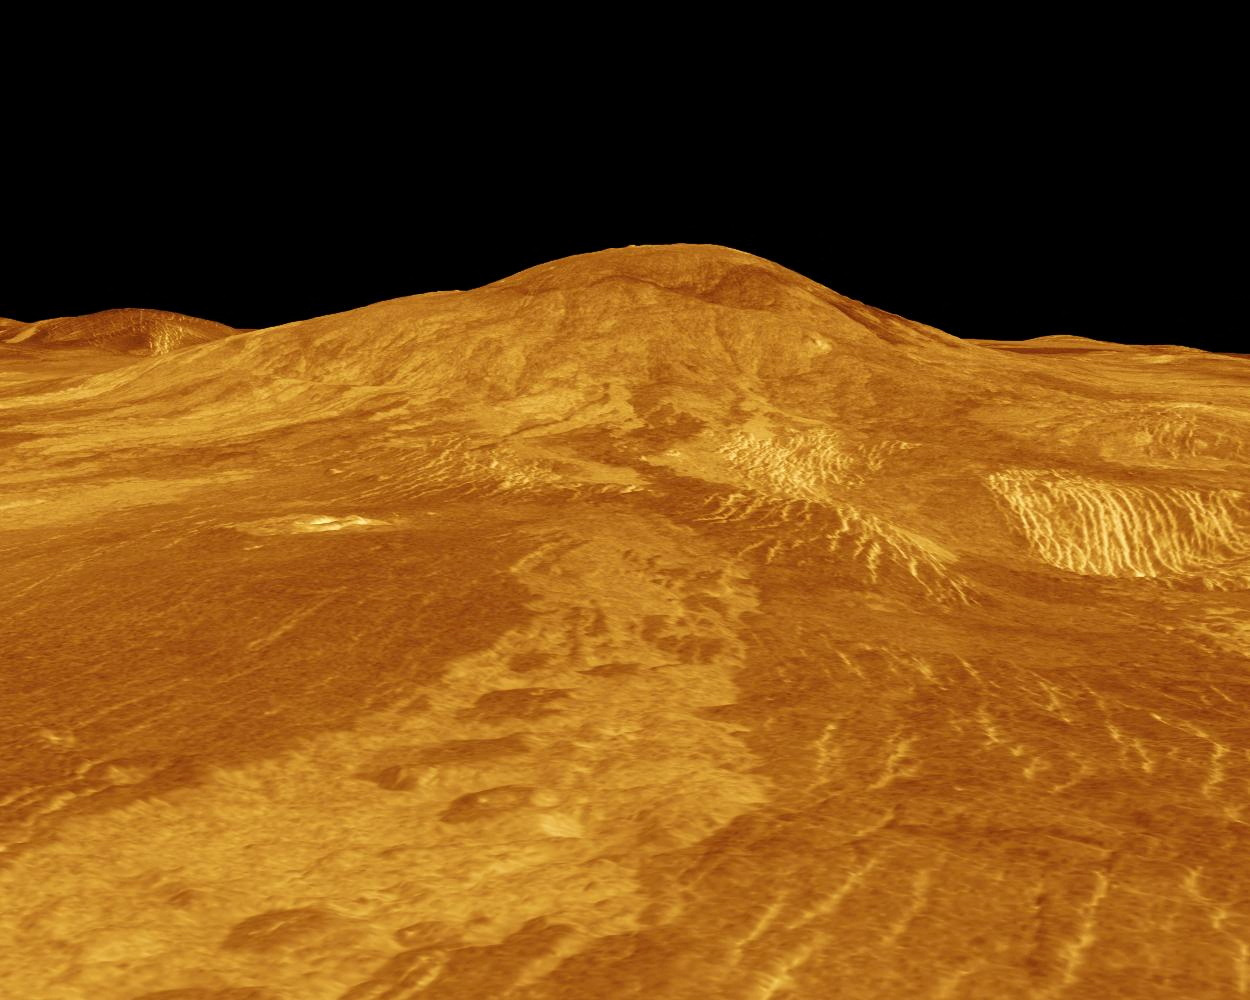 A computer-generated 3D model of Venus' surface shows the volcano Sif Mons